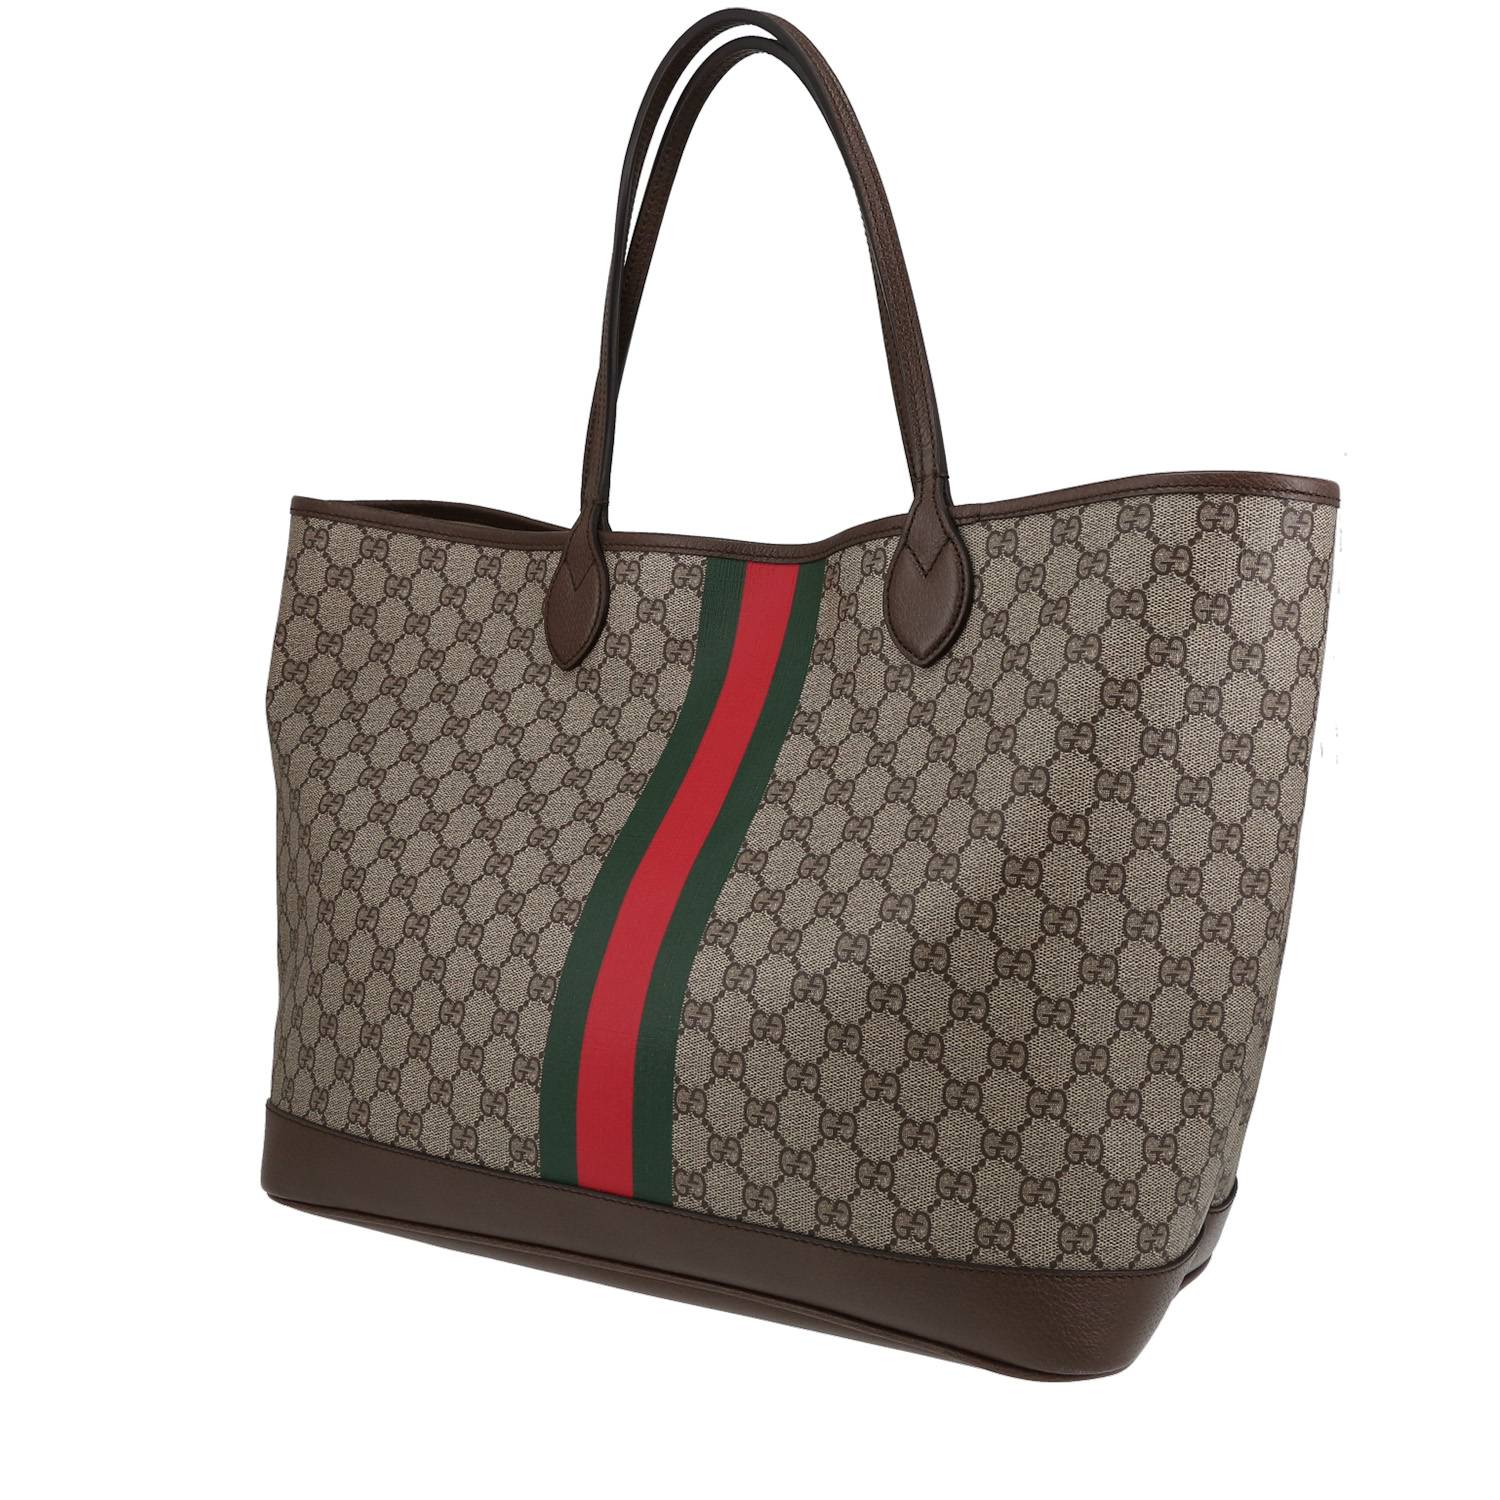 GUCCI OPHIDIA GG BACKPACK, HealthdesignShops